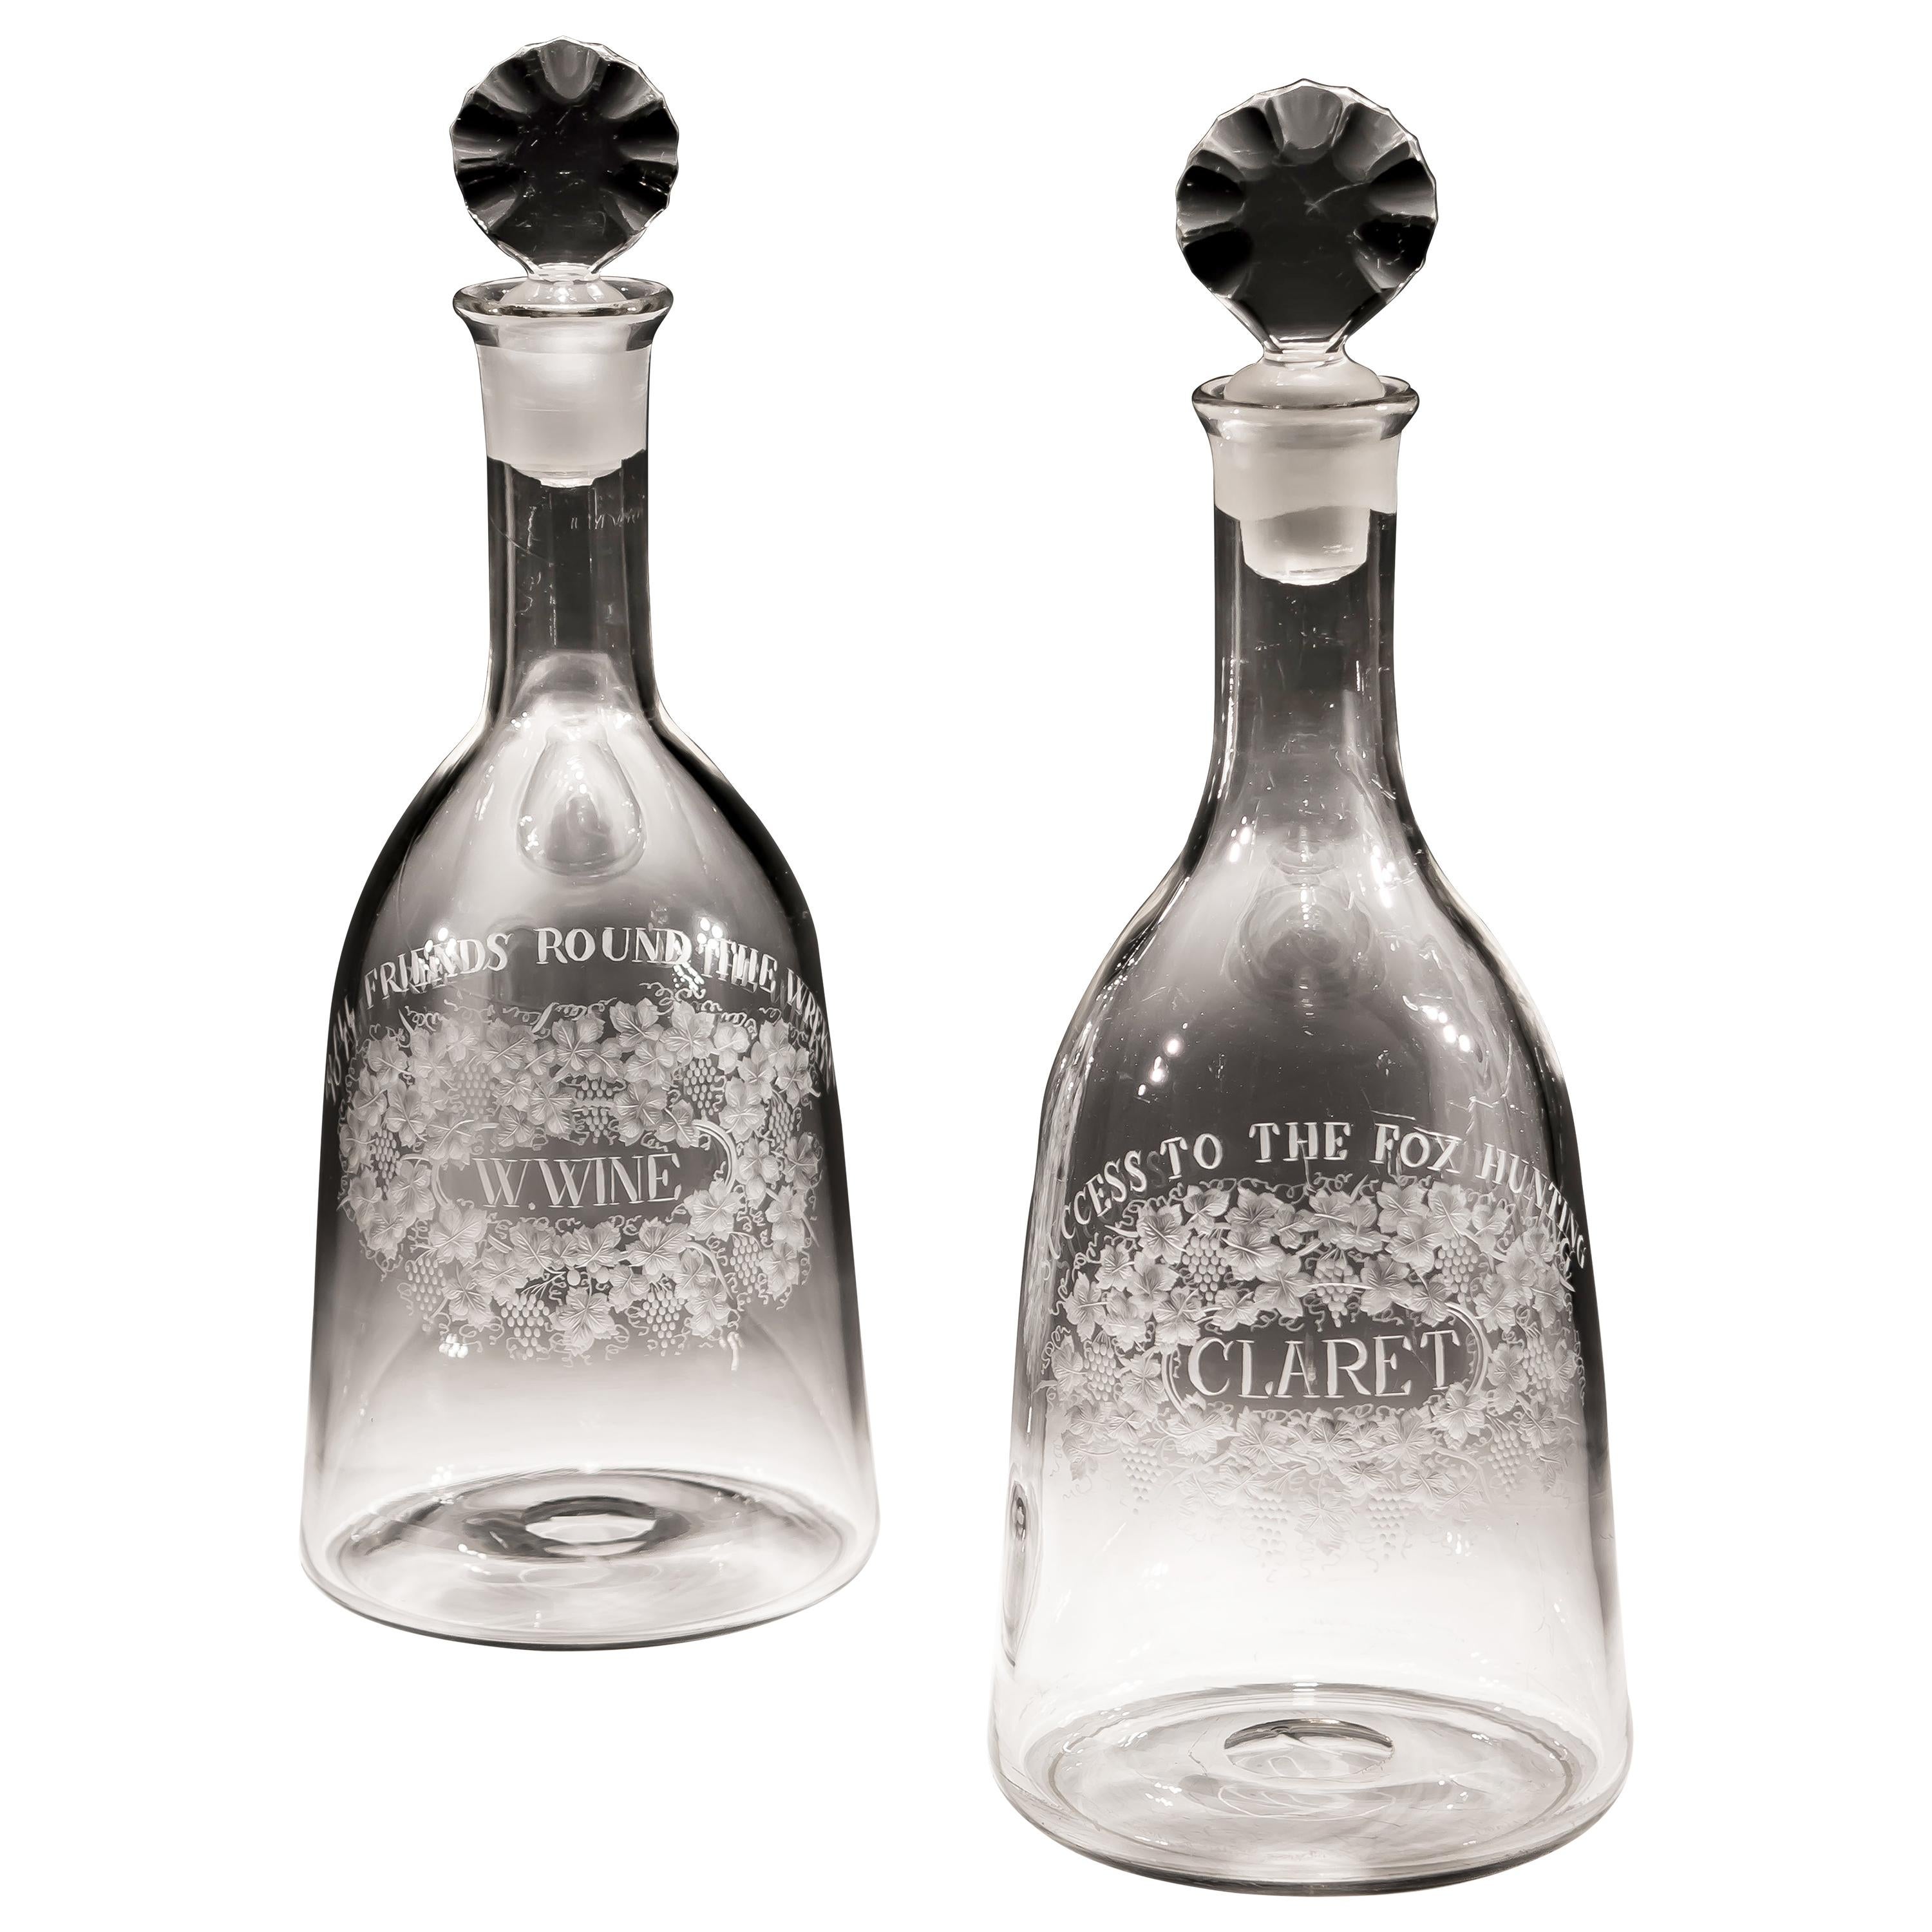 Exquisite Engraved Pair of Georgian Labelled Mallet Decanters For Sale